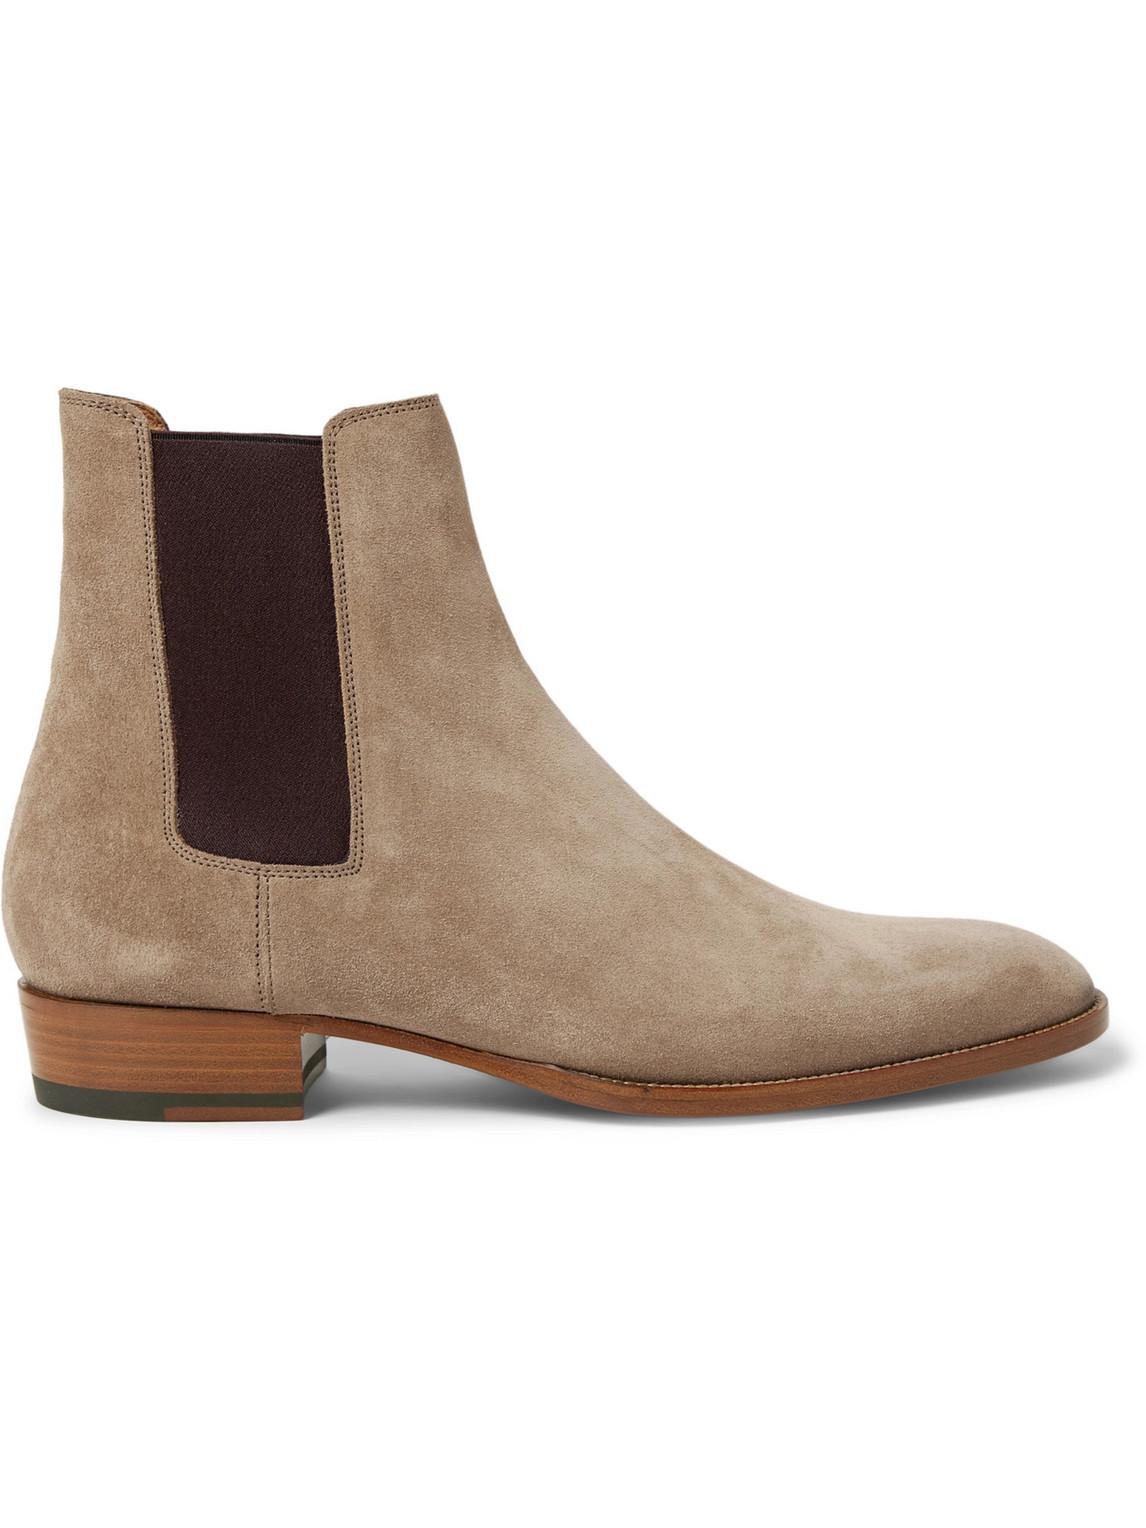 Saint Laurent Mens Taupe Wyatt Suede Chelsea Boots 11 in Brown for Men -  Save 65% - Lyst